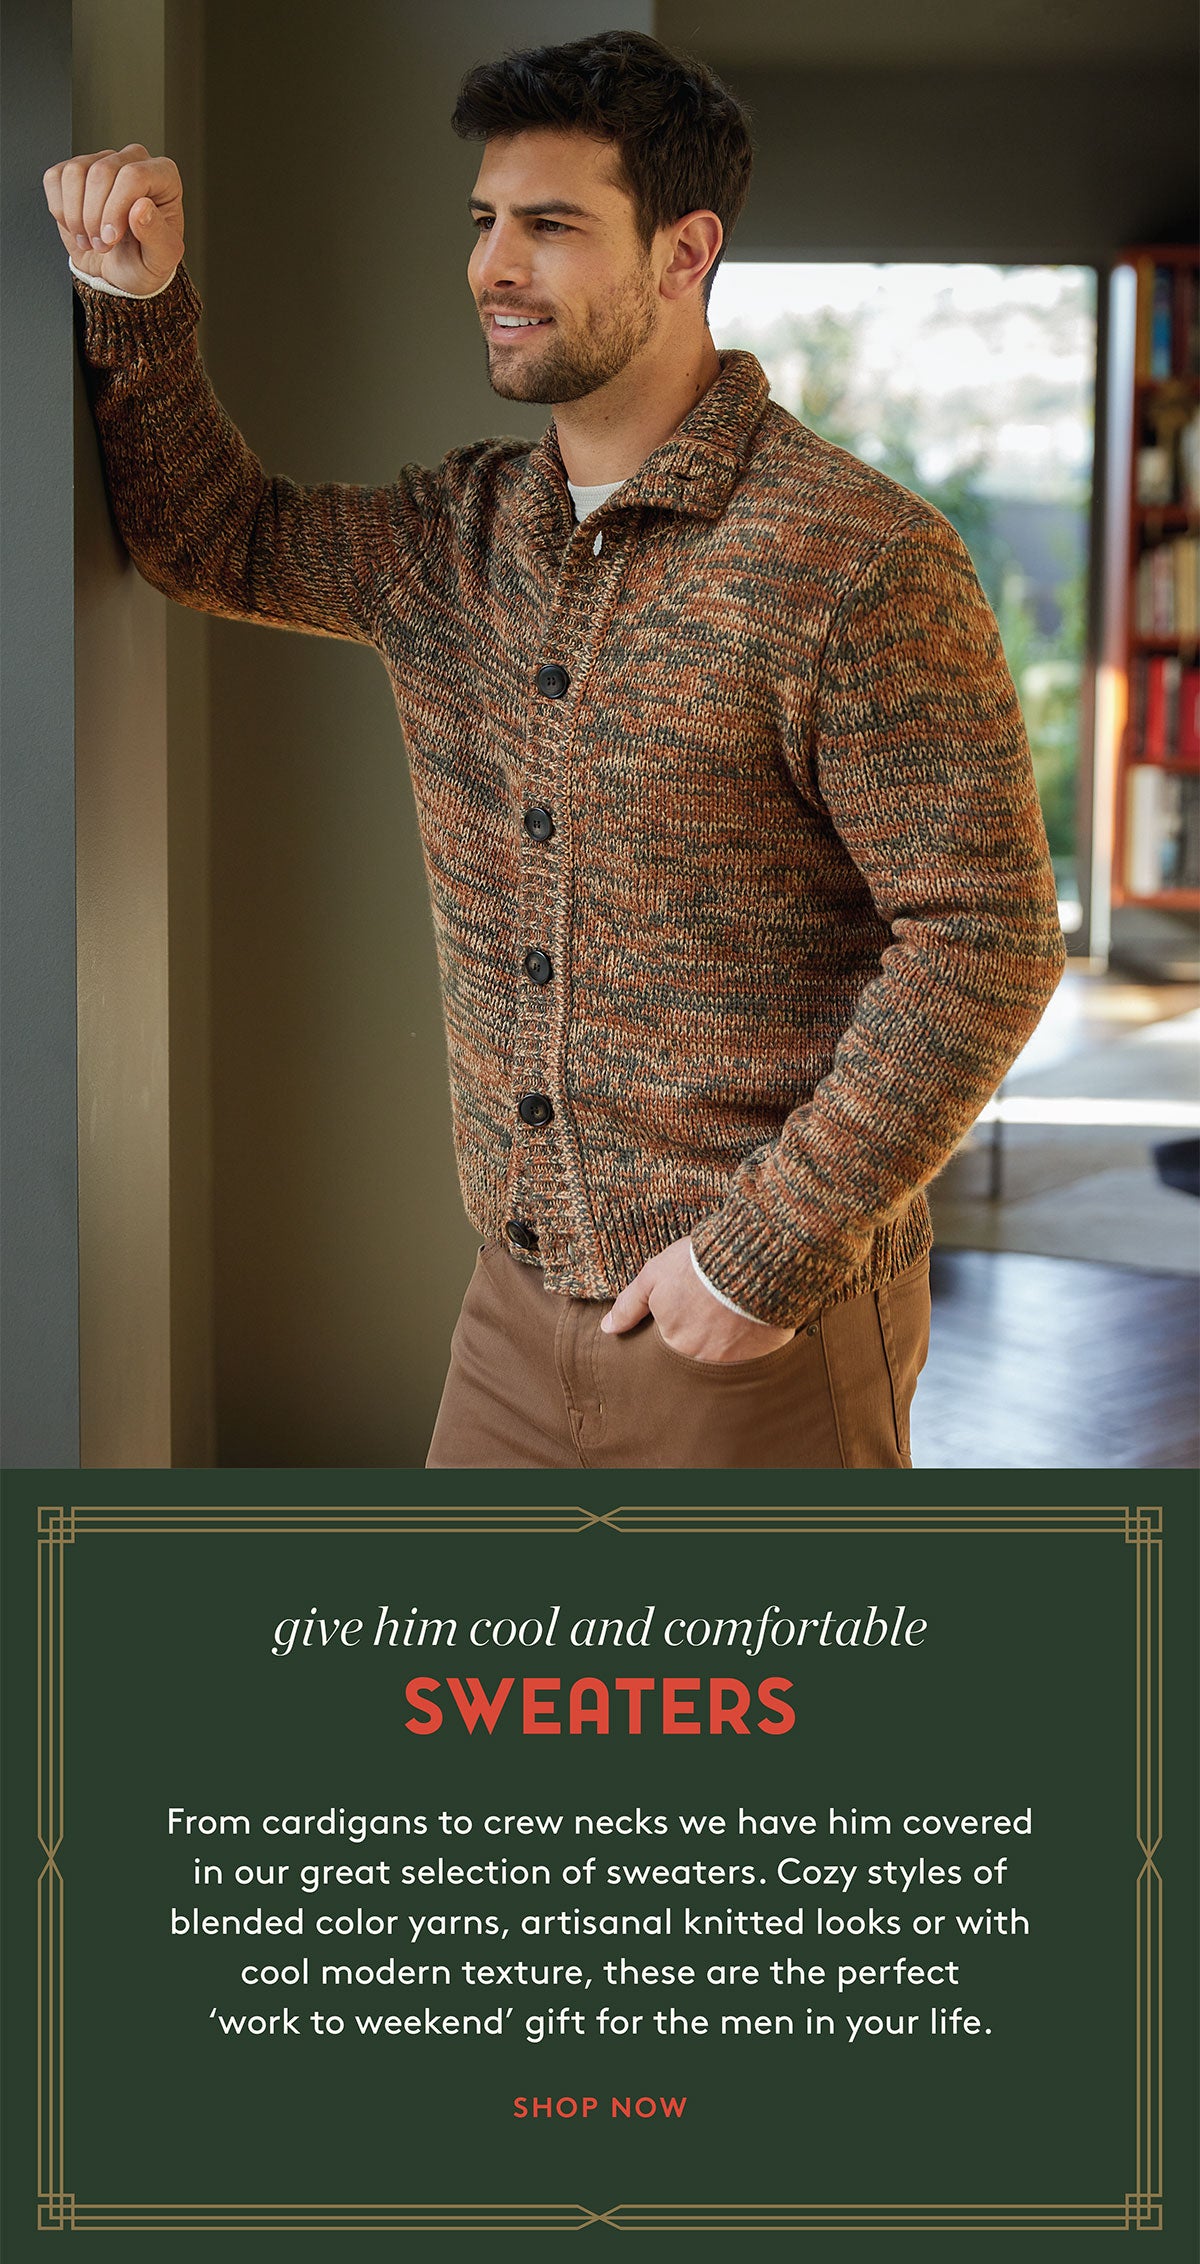 give him cool and comfortable SWEATERS From cardigans to crew necks we have him covered in our great selection of sweaters. Cozy styles of blended color yarns, artisanal knitted looks or with cool modern texture, these are the perfect 'work to weekend' gift for the men in your life. SHOP NOW